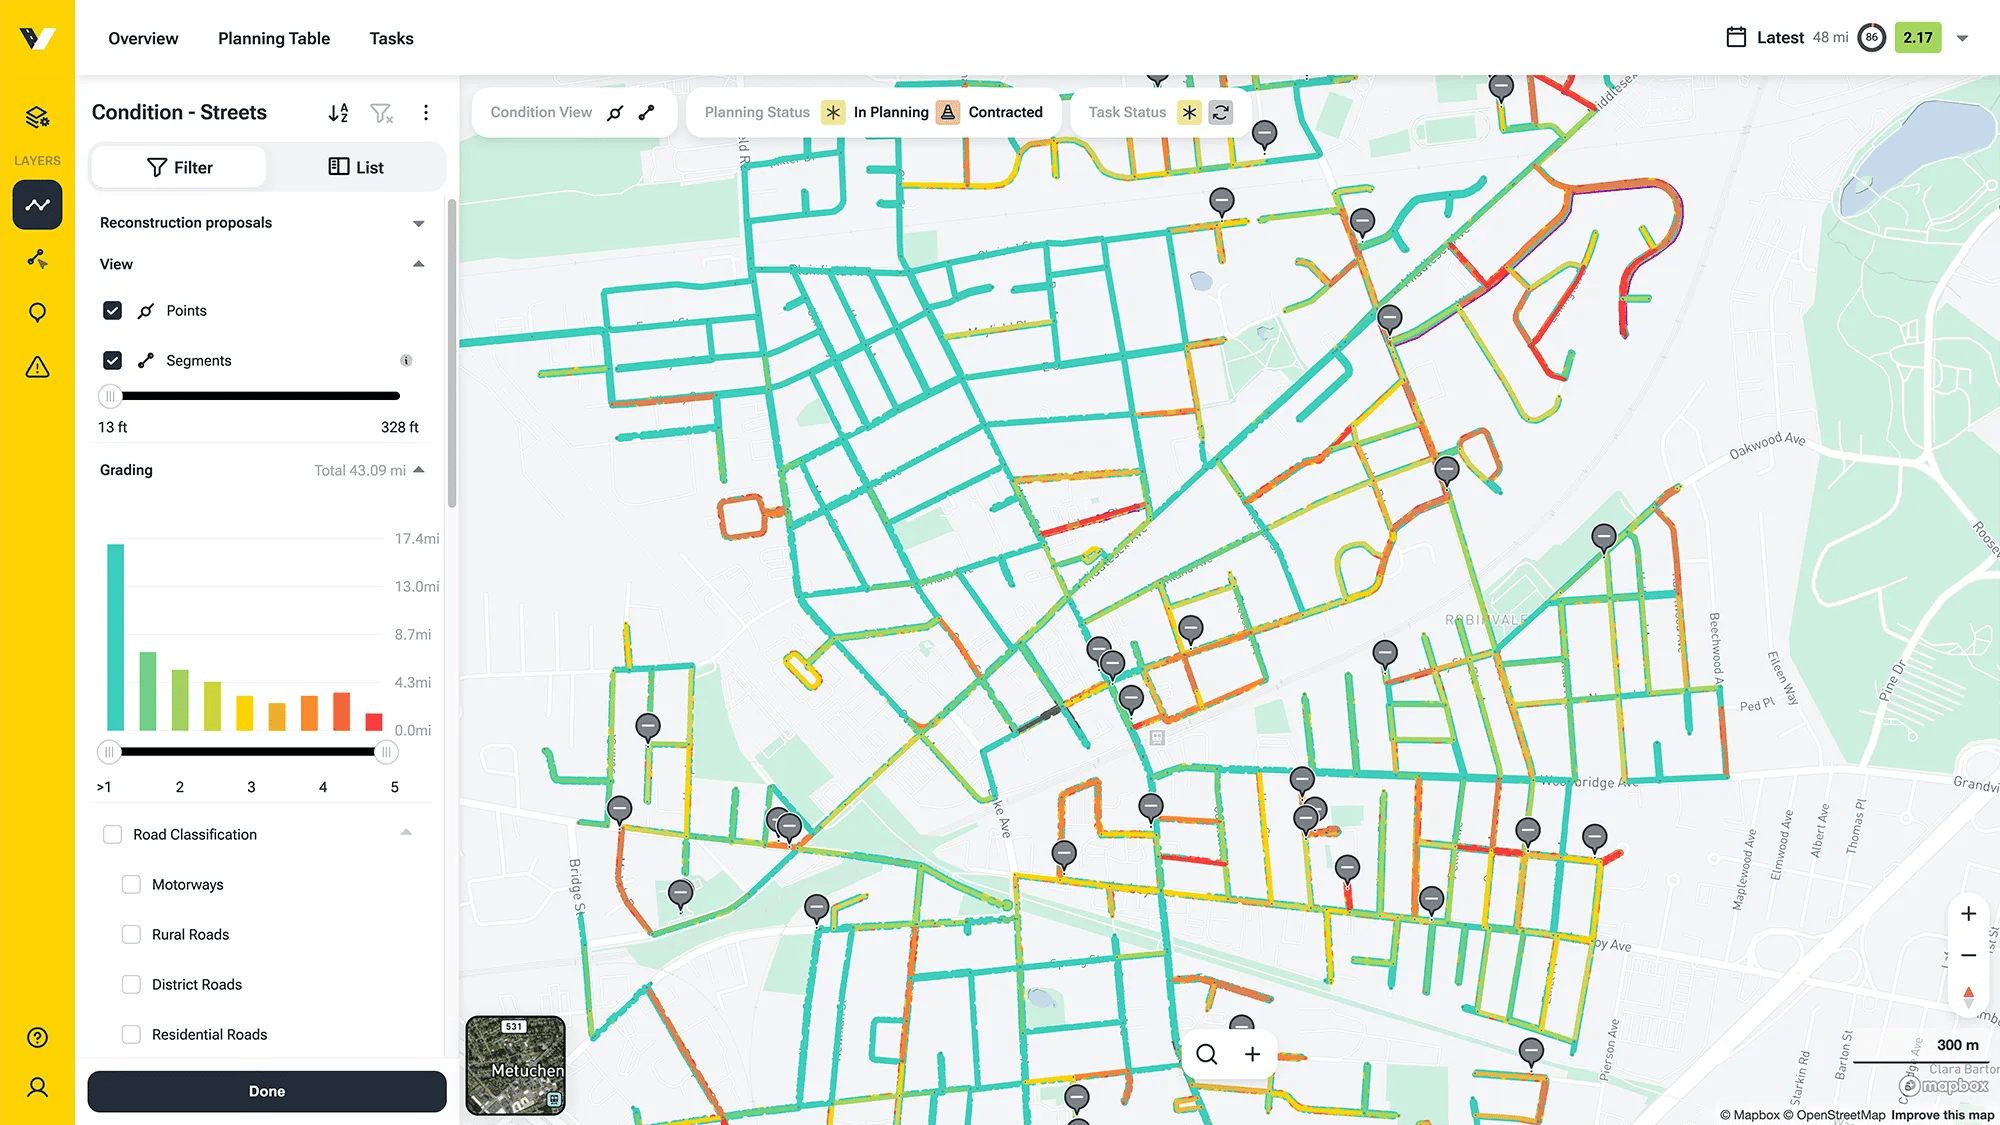 Screenshot of the vialytcs web system showing the map of Metuchen and the condition of the streets